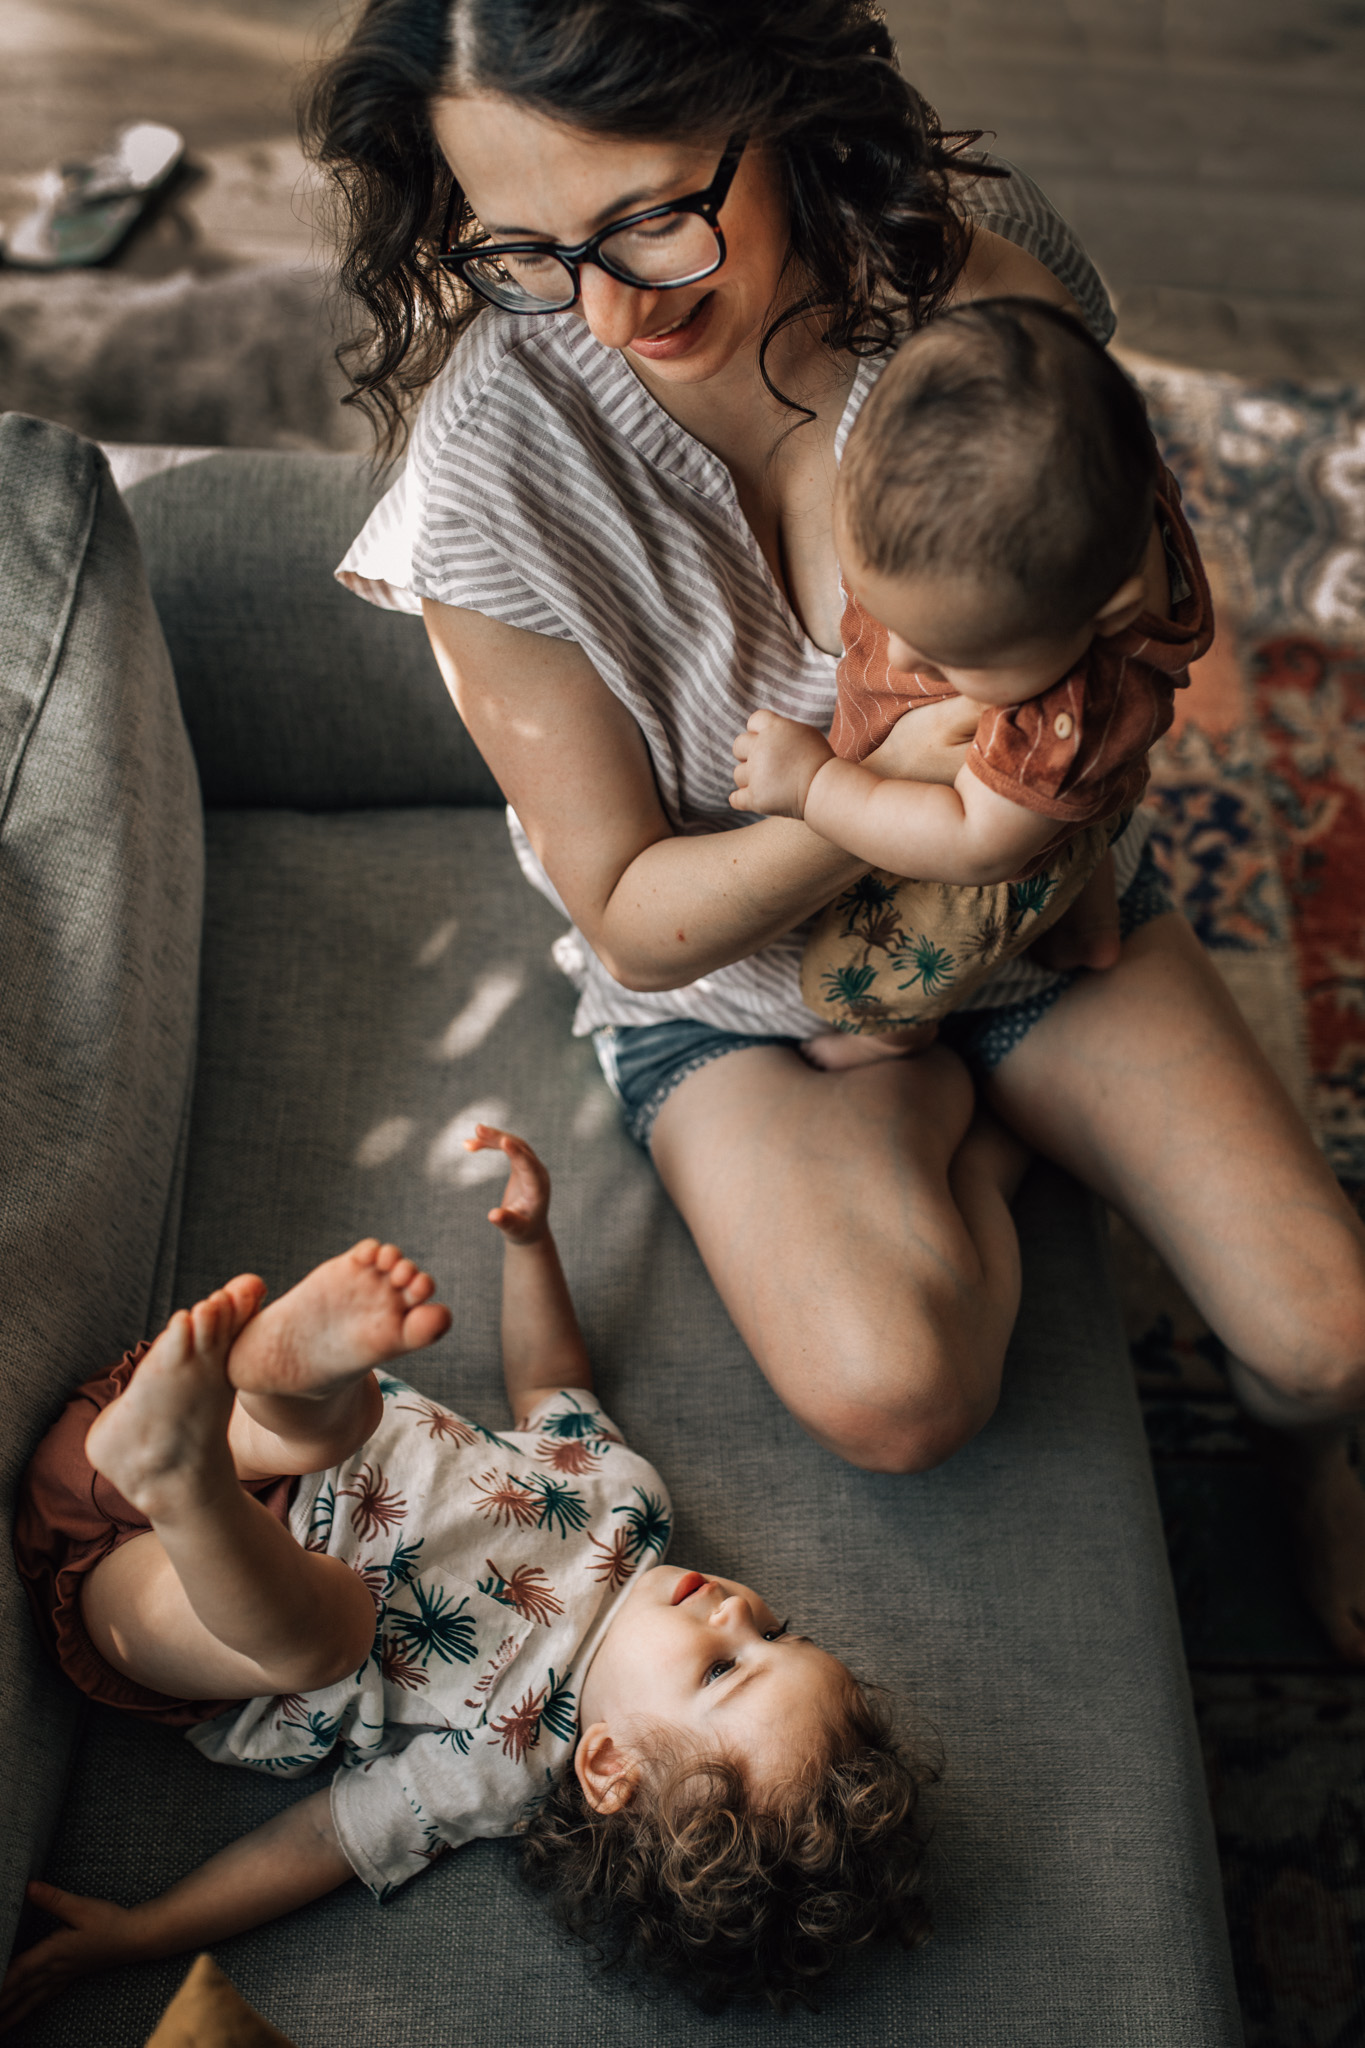 Family photography in Amsterdam: in the picture a mother with her two children is on the couch. She's holding her baby while her toddler is laying on the couch with her legs and feet pointing to the ceiling. The picture is taken from above.